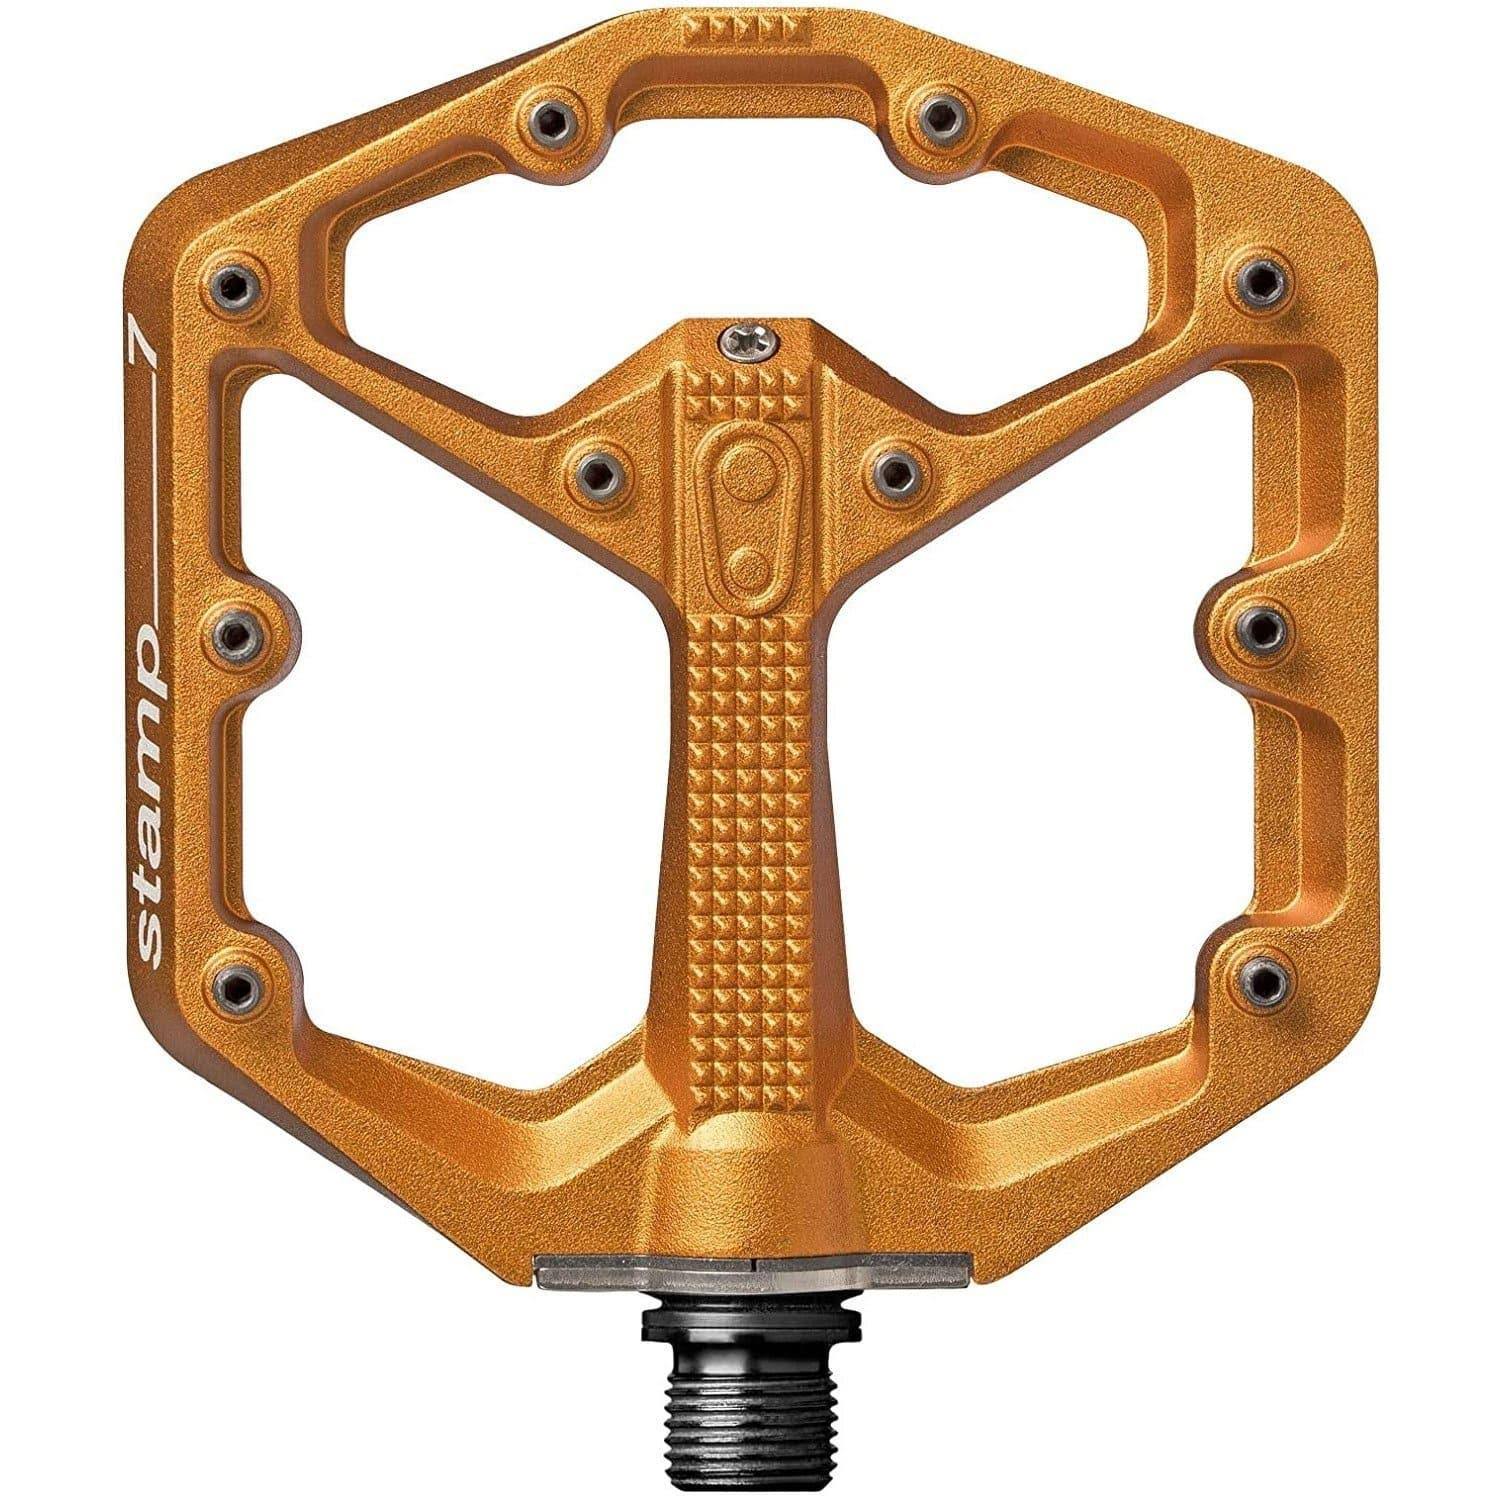 Crankbrothers Limited Edition Stamp 7 Pedal - Orange, Small